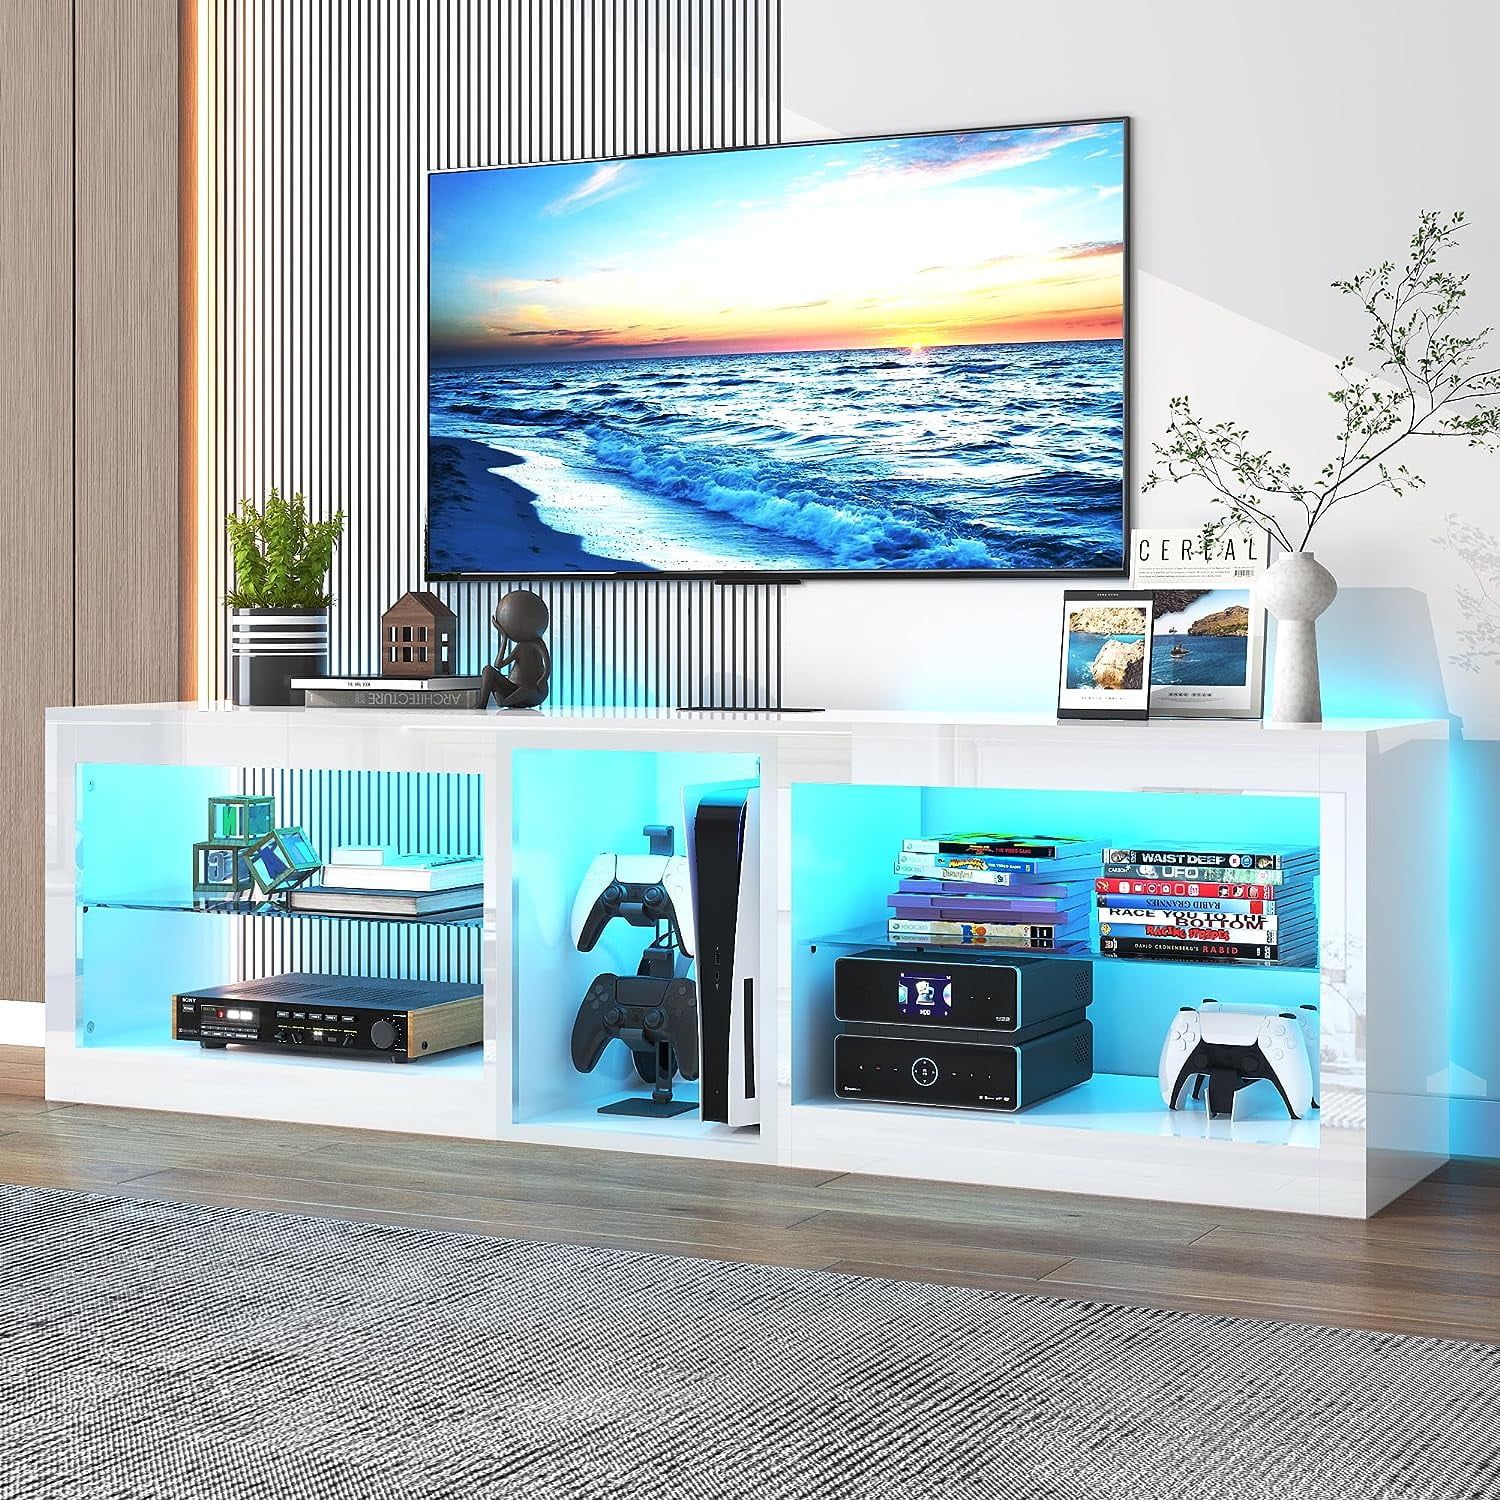 Chvans Modern Led Tv Stand For Tvs Up To 70" With Adjustable Led Lights/ Outlet, High Gloss Entertainment Center With Open Shelves Storage, Media Console  Tv Stands For Living Room, Game Room, Bedroom(White 63 Pertaining To Led Tv Stands With Outlet (View 5 of 15)